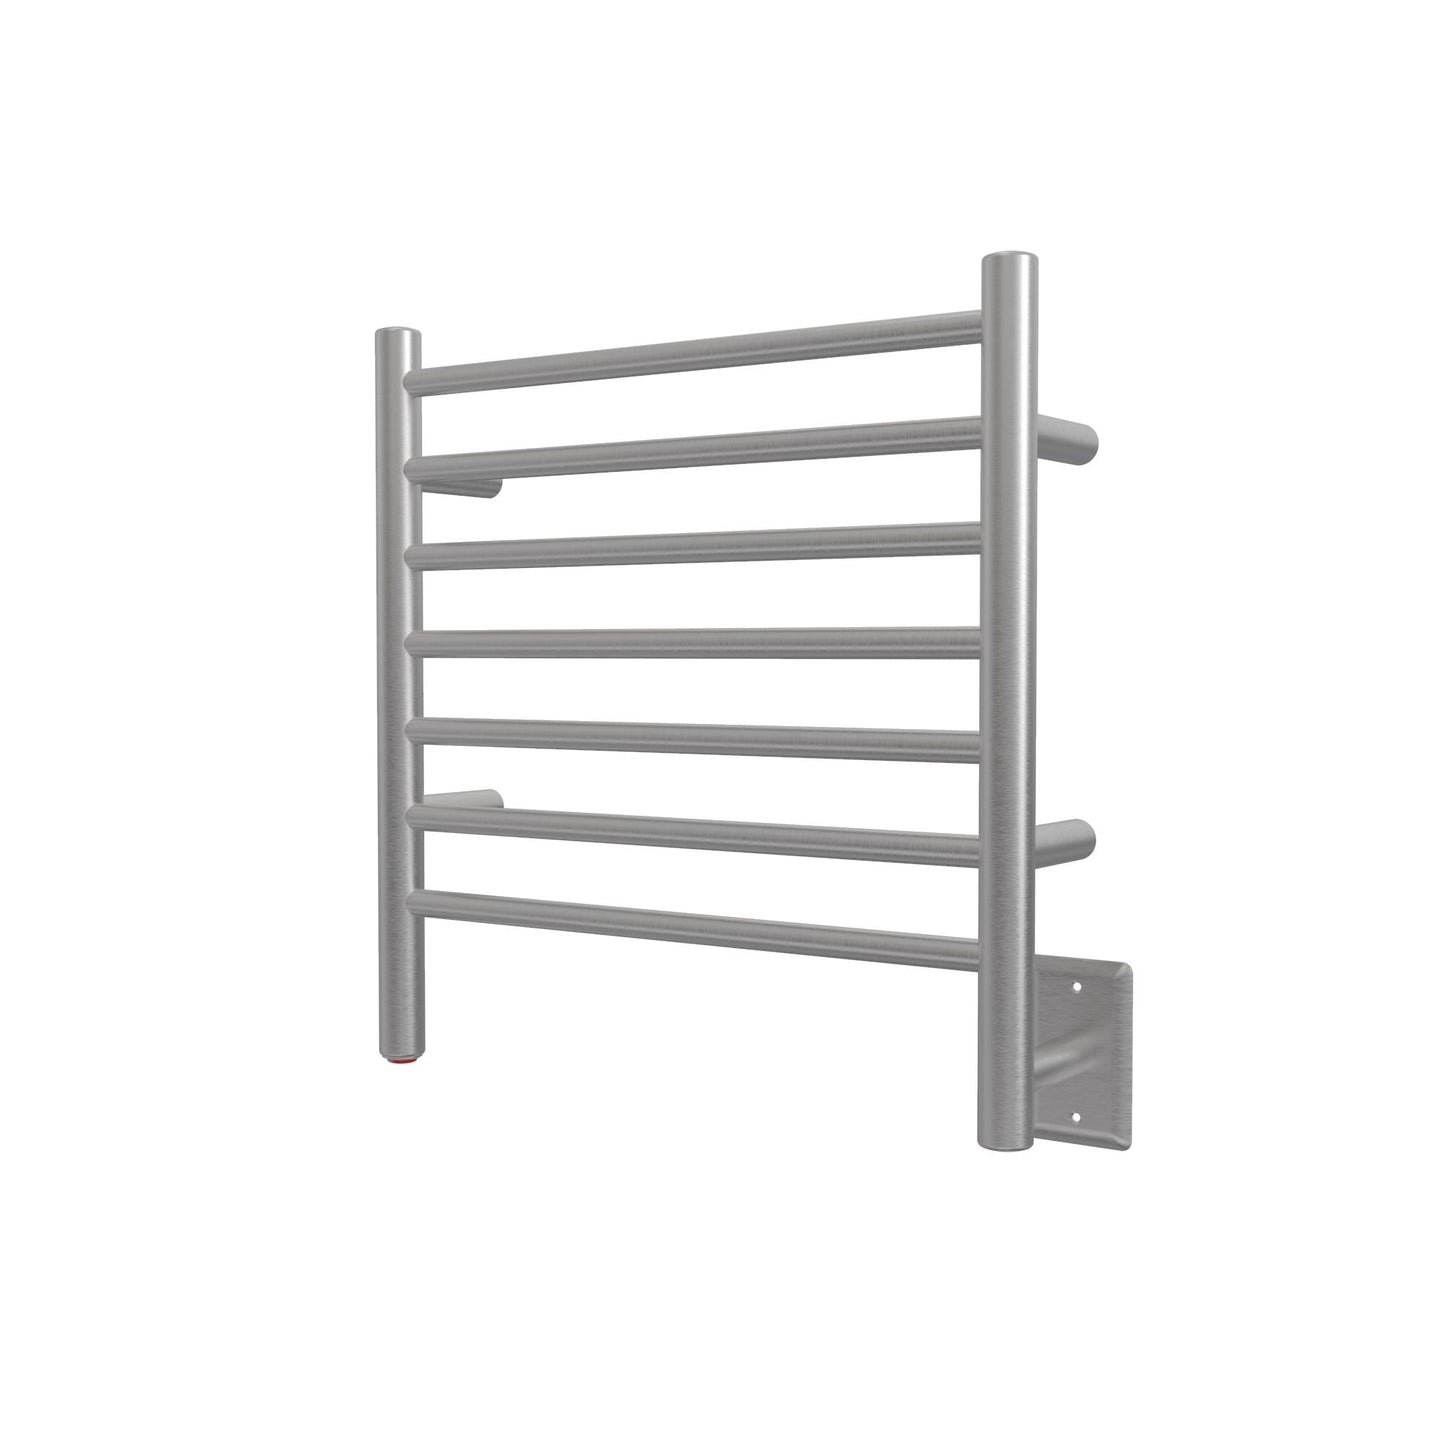 Amba Radiant Small Straight Hardwired or Plug-In Wall Mounted Towel Warmer - 20.375"w x 21.25"h